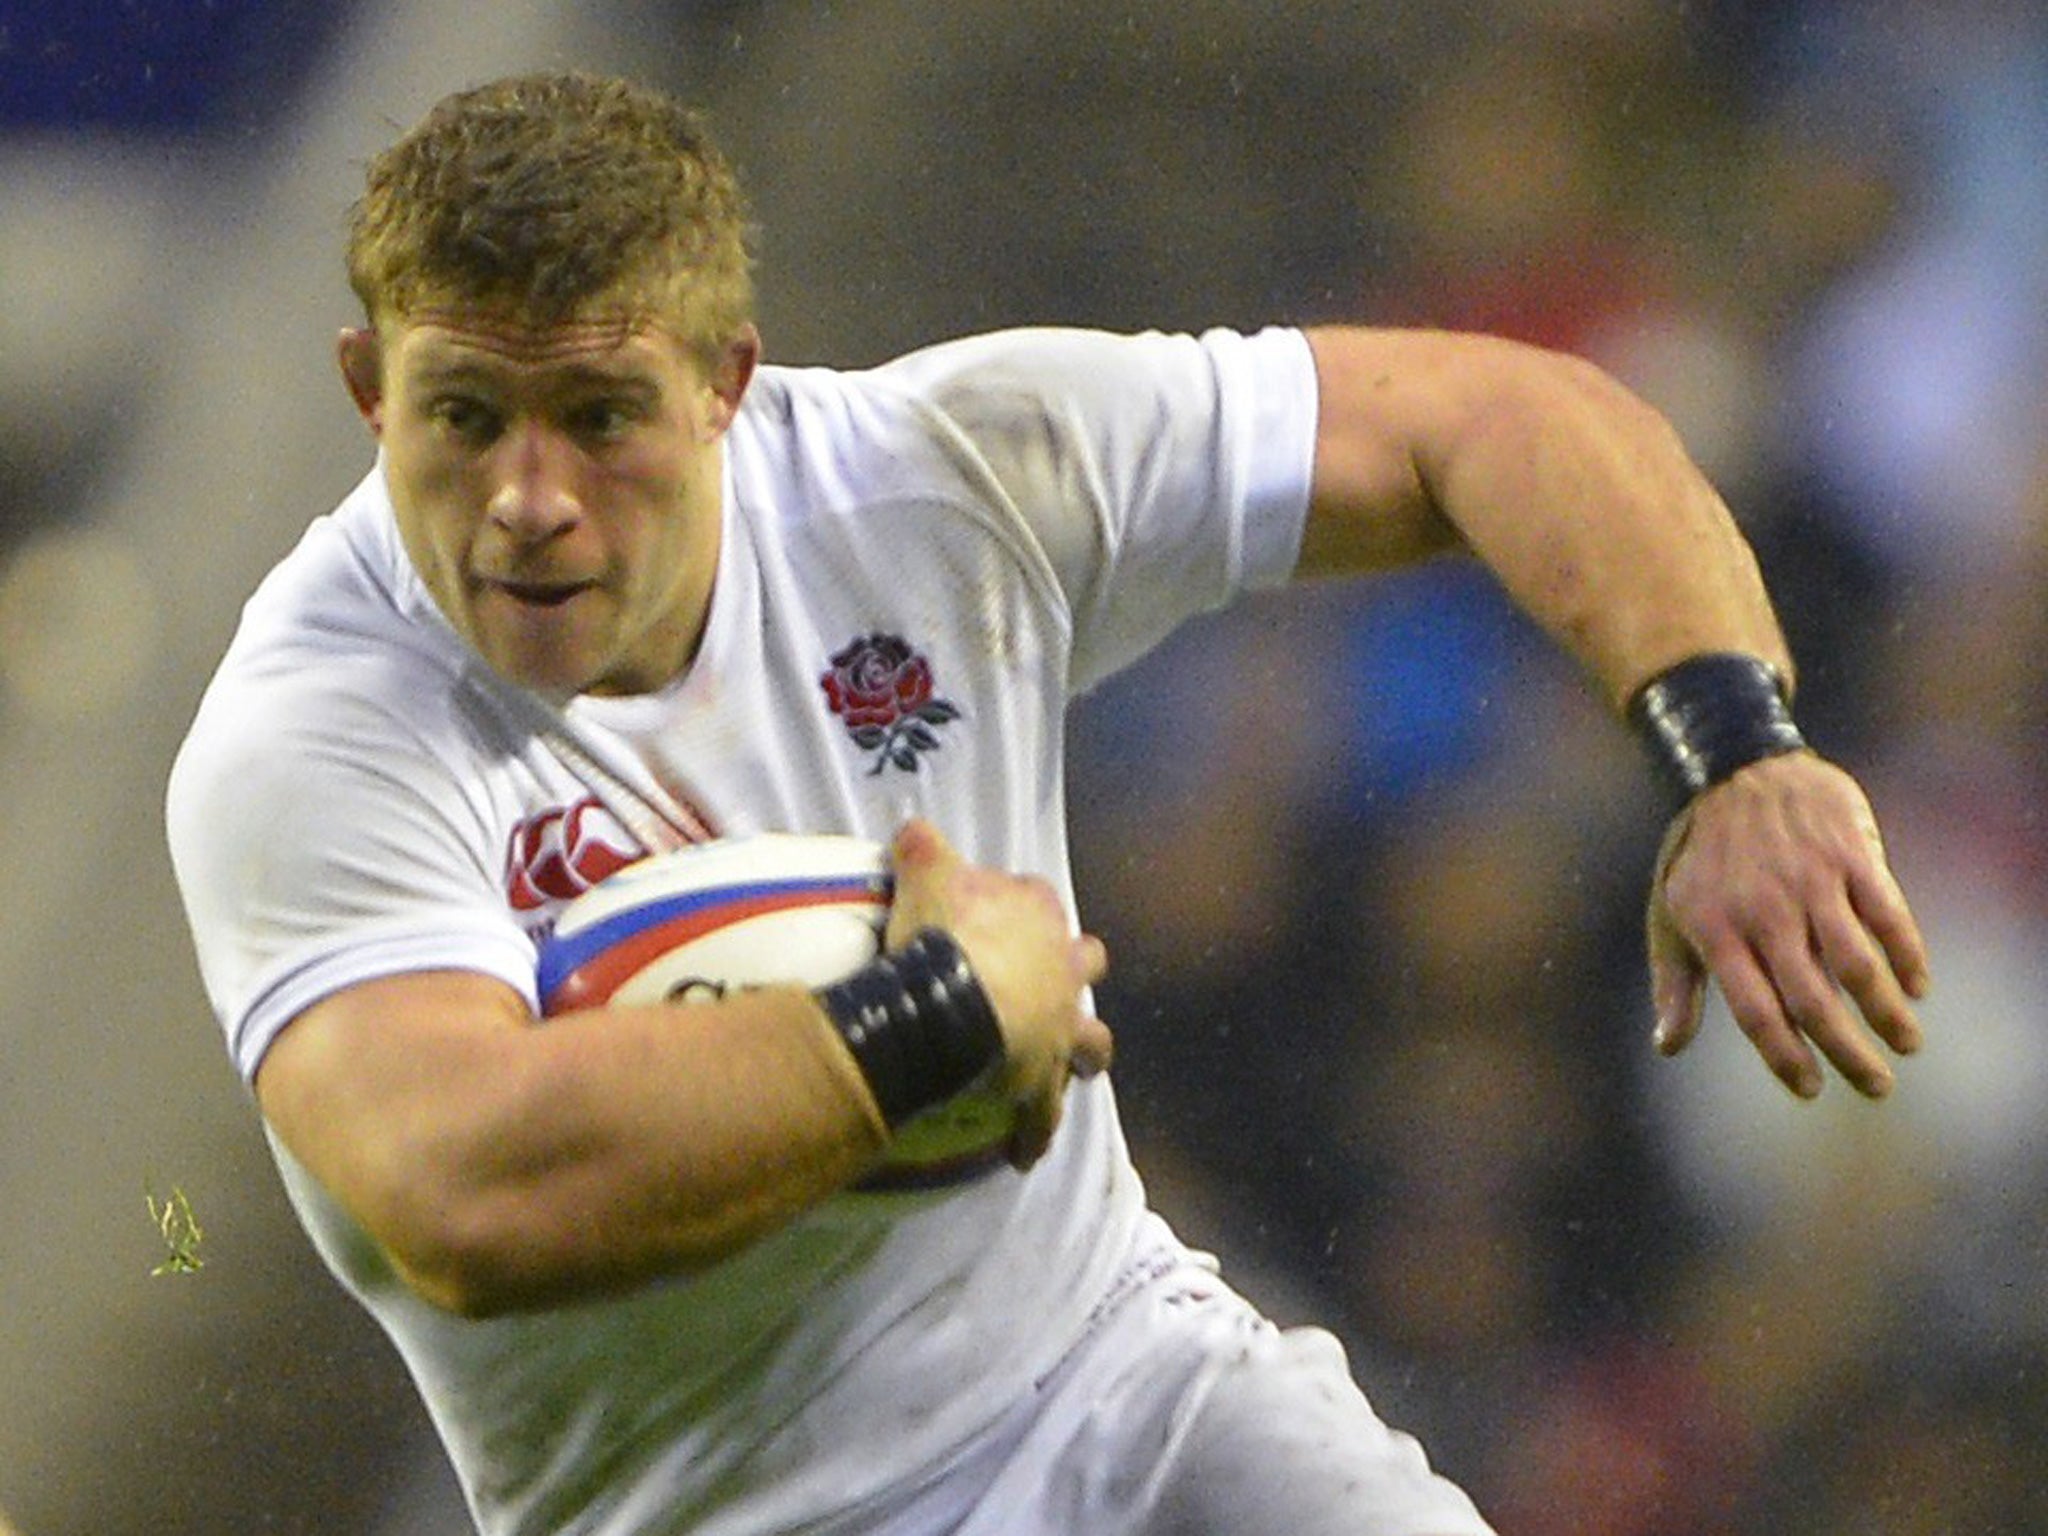 England's Tom Youngs against South Africa at Twickenham